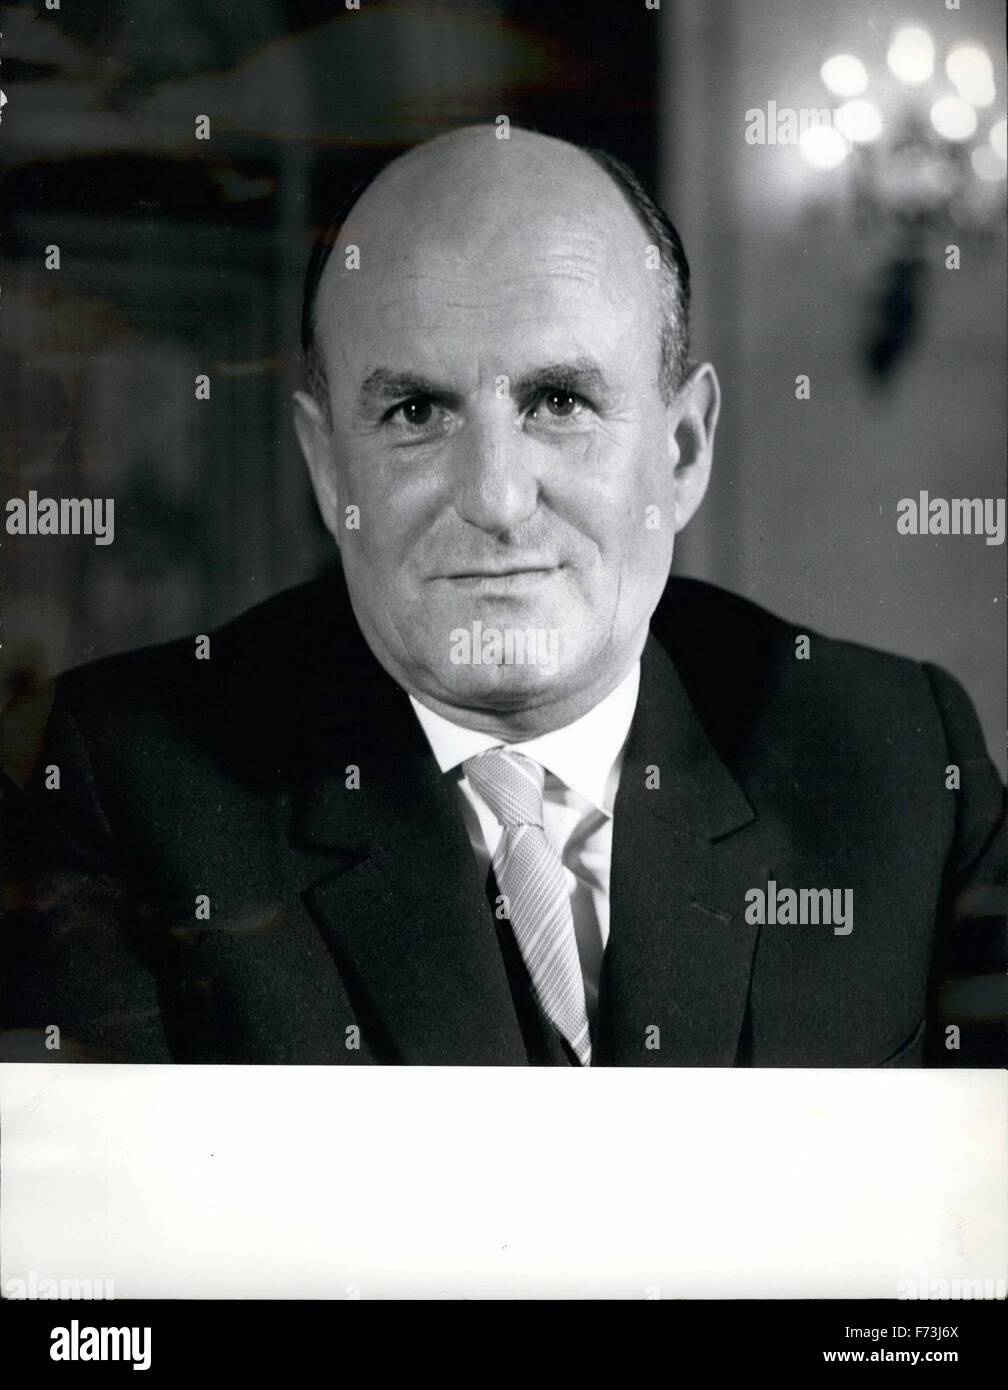 1968 - Buudosuiminter fur Fiuaureu Mr Josef Klaus Dr. Josef Claus former Federal Minister of Finance, national chairman of the Austrian people's party (Conservative) © Keystone Pictures USA/ZUMAPRESS.com/Alamy Live News Stock Photo